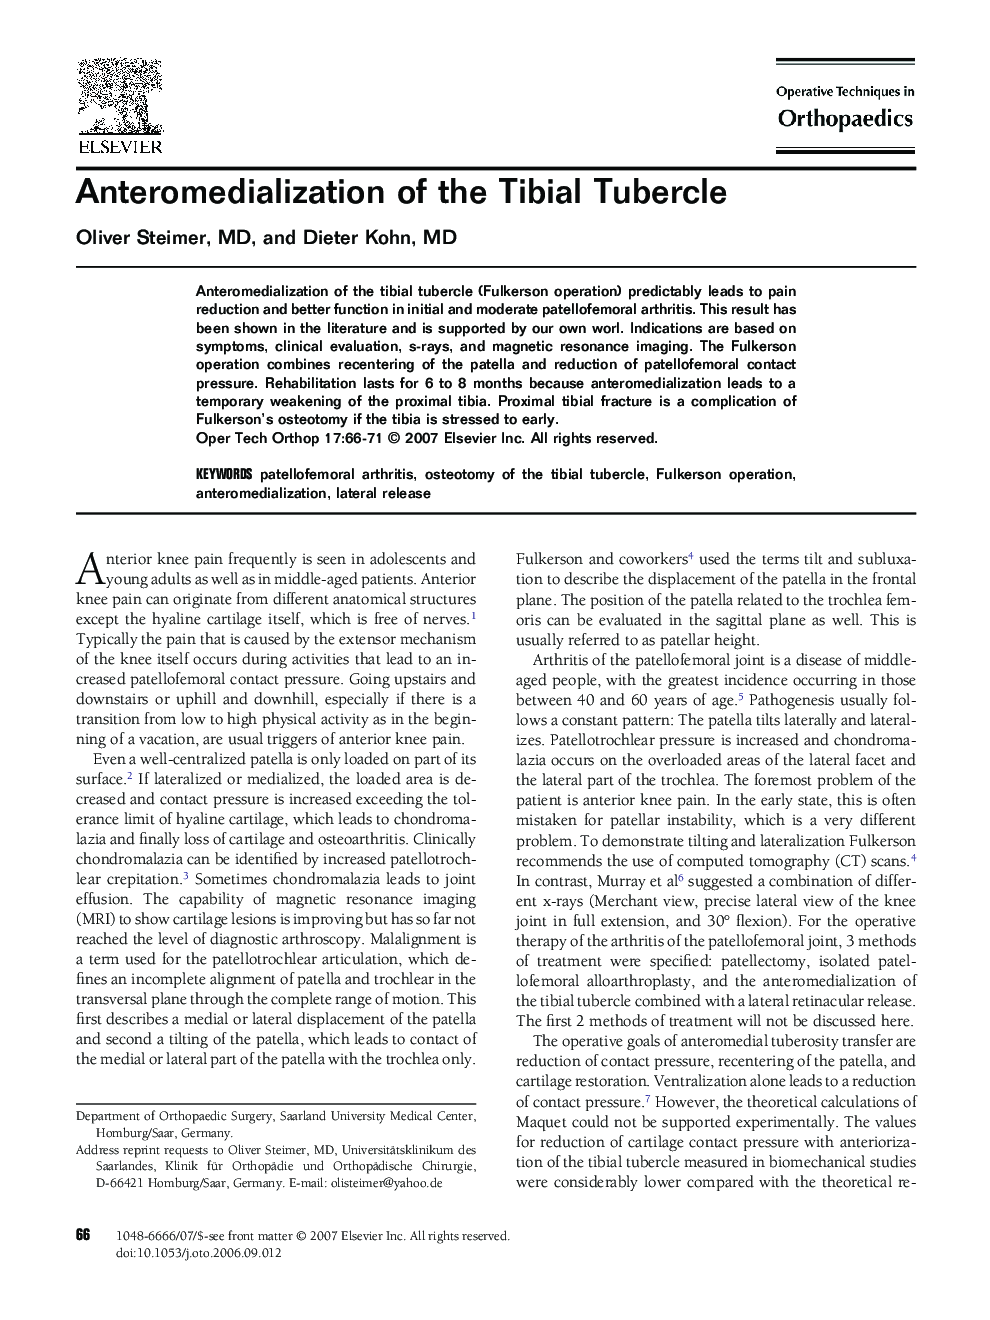 Anteromedialization of the Tibial Tubercle